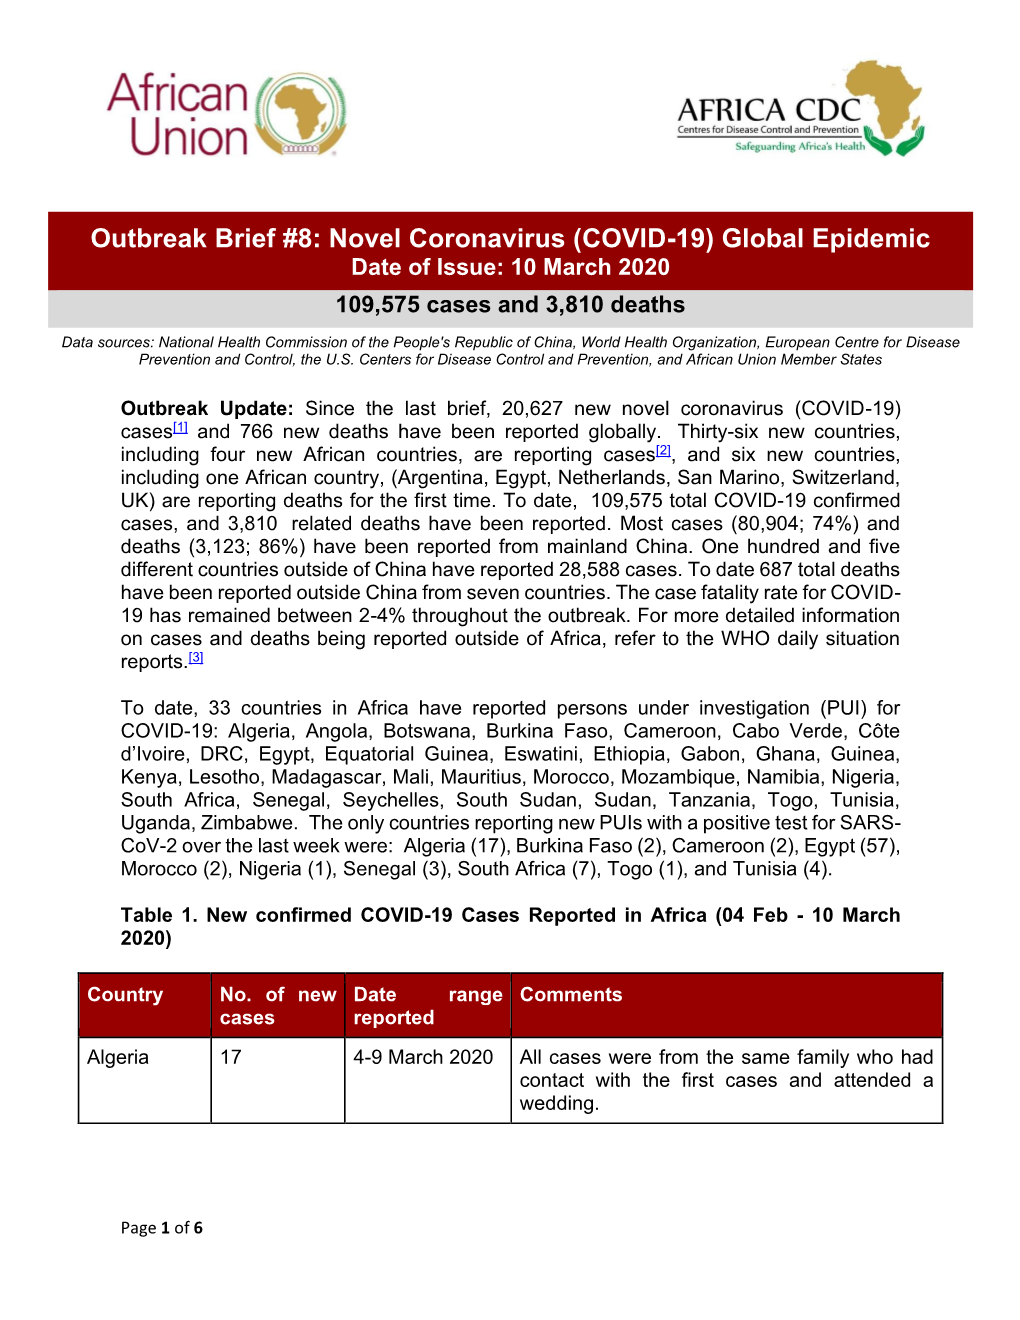 Outbreak Brief #8: Novel Coronavirus (COVID-19) Global Epidemic Date of Issue: 10 March 2020 109,575 Cases and 3,810 Deaths